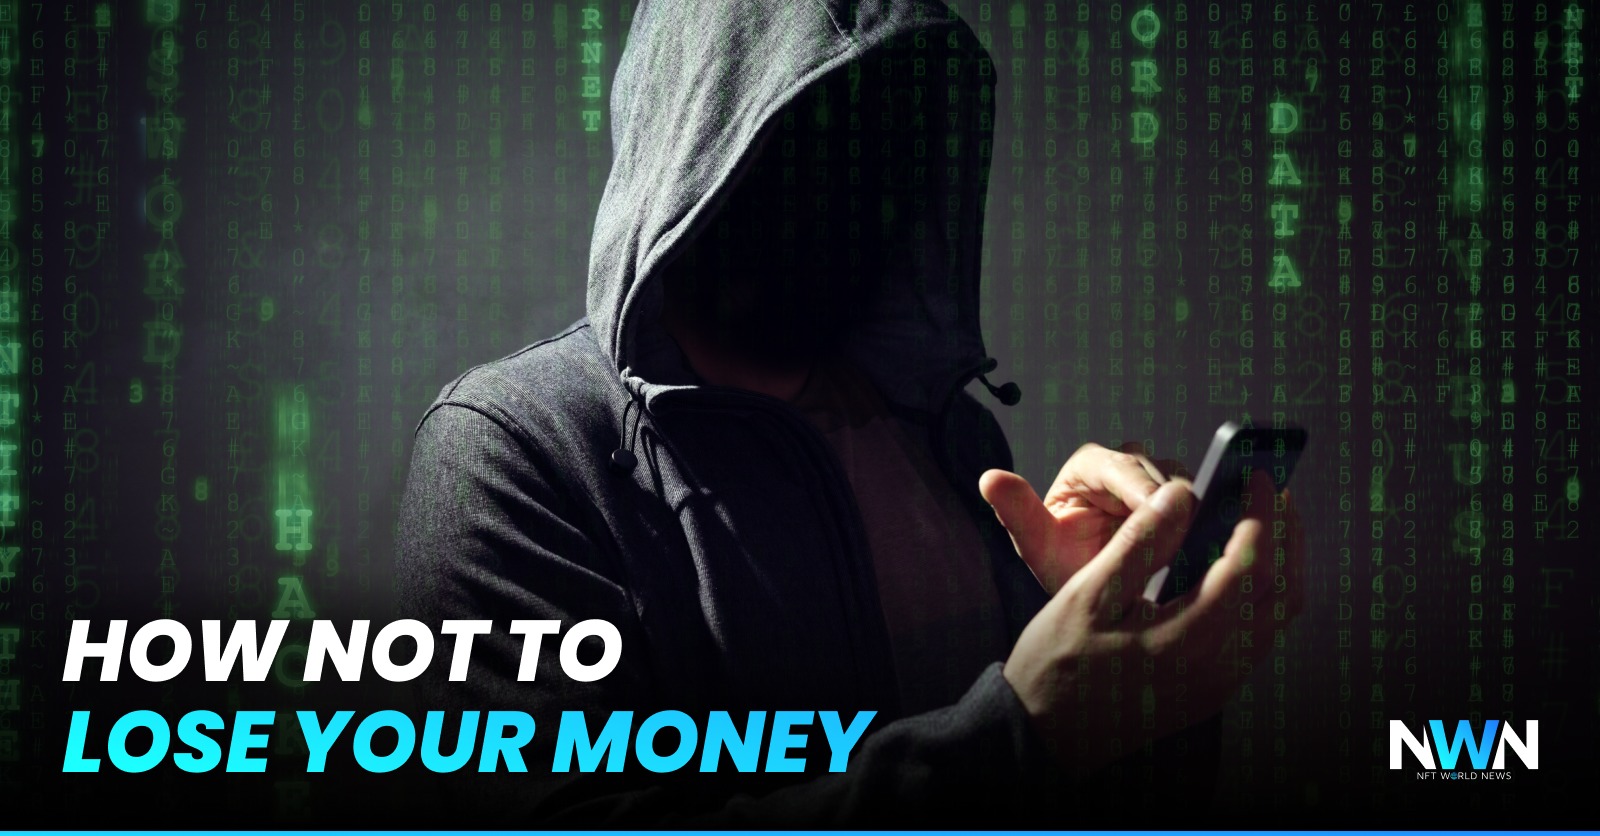 Honeypot Scams: How Not to Lose All Your Money